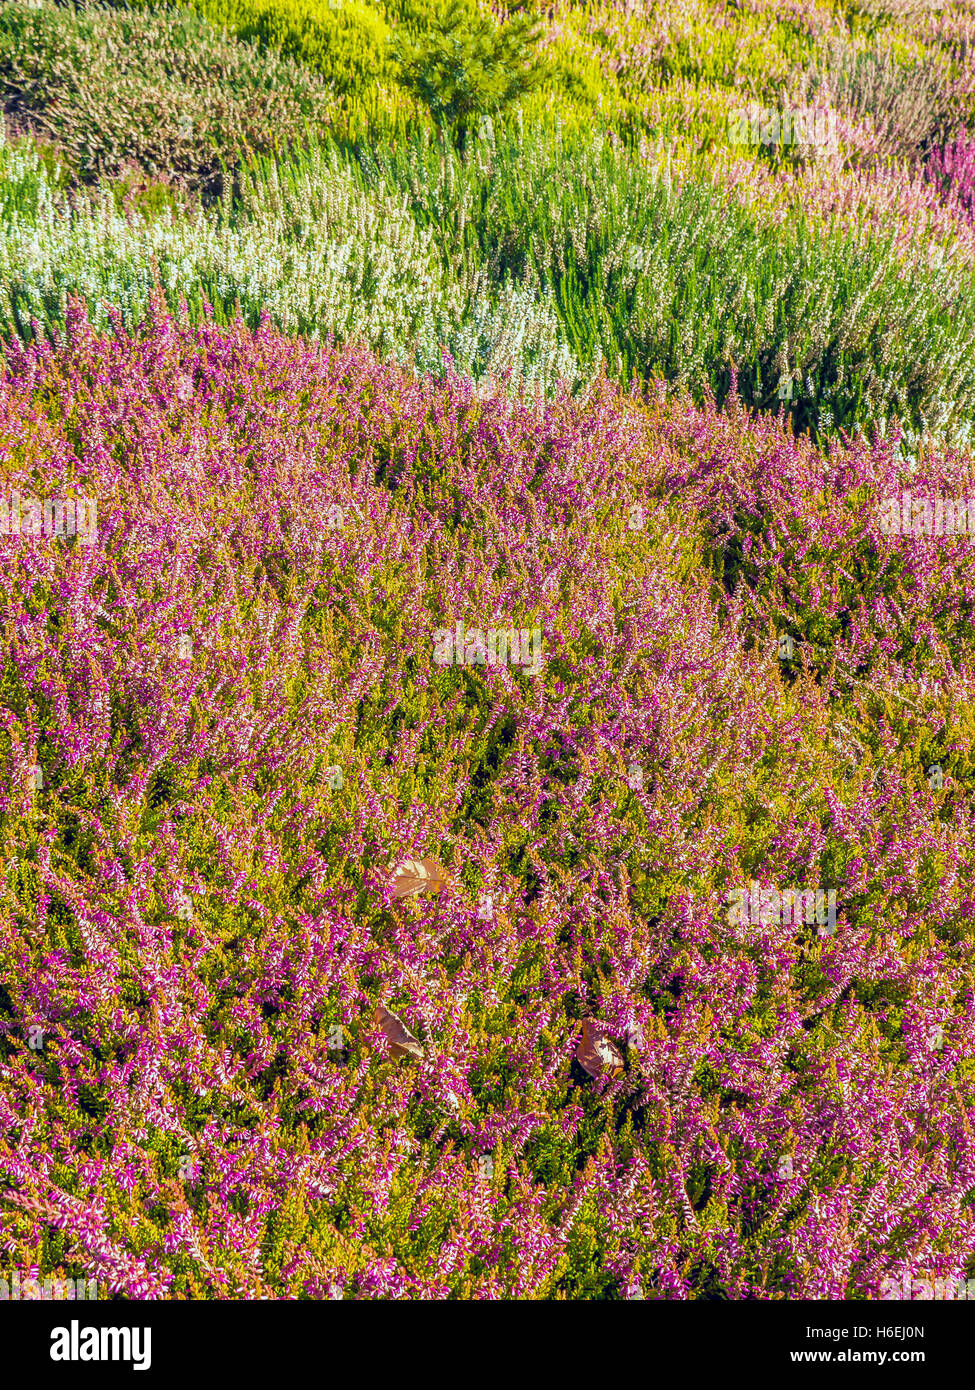 Field of colorful heather flowers Stock Photo